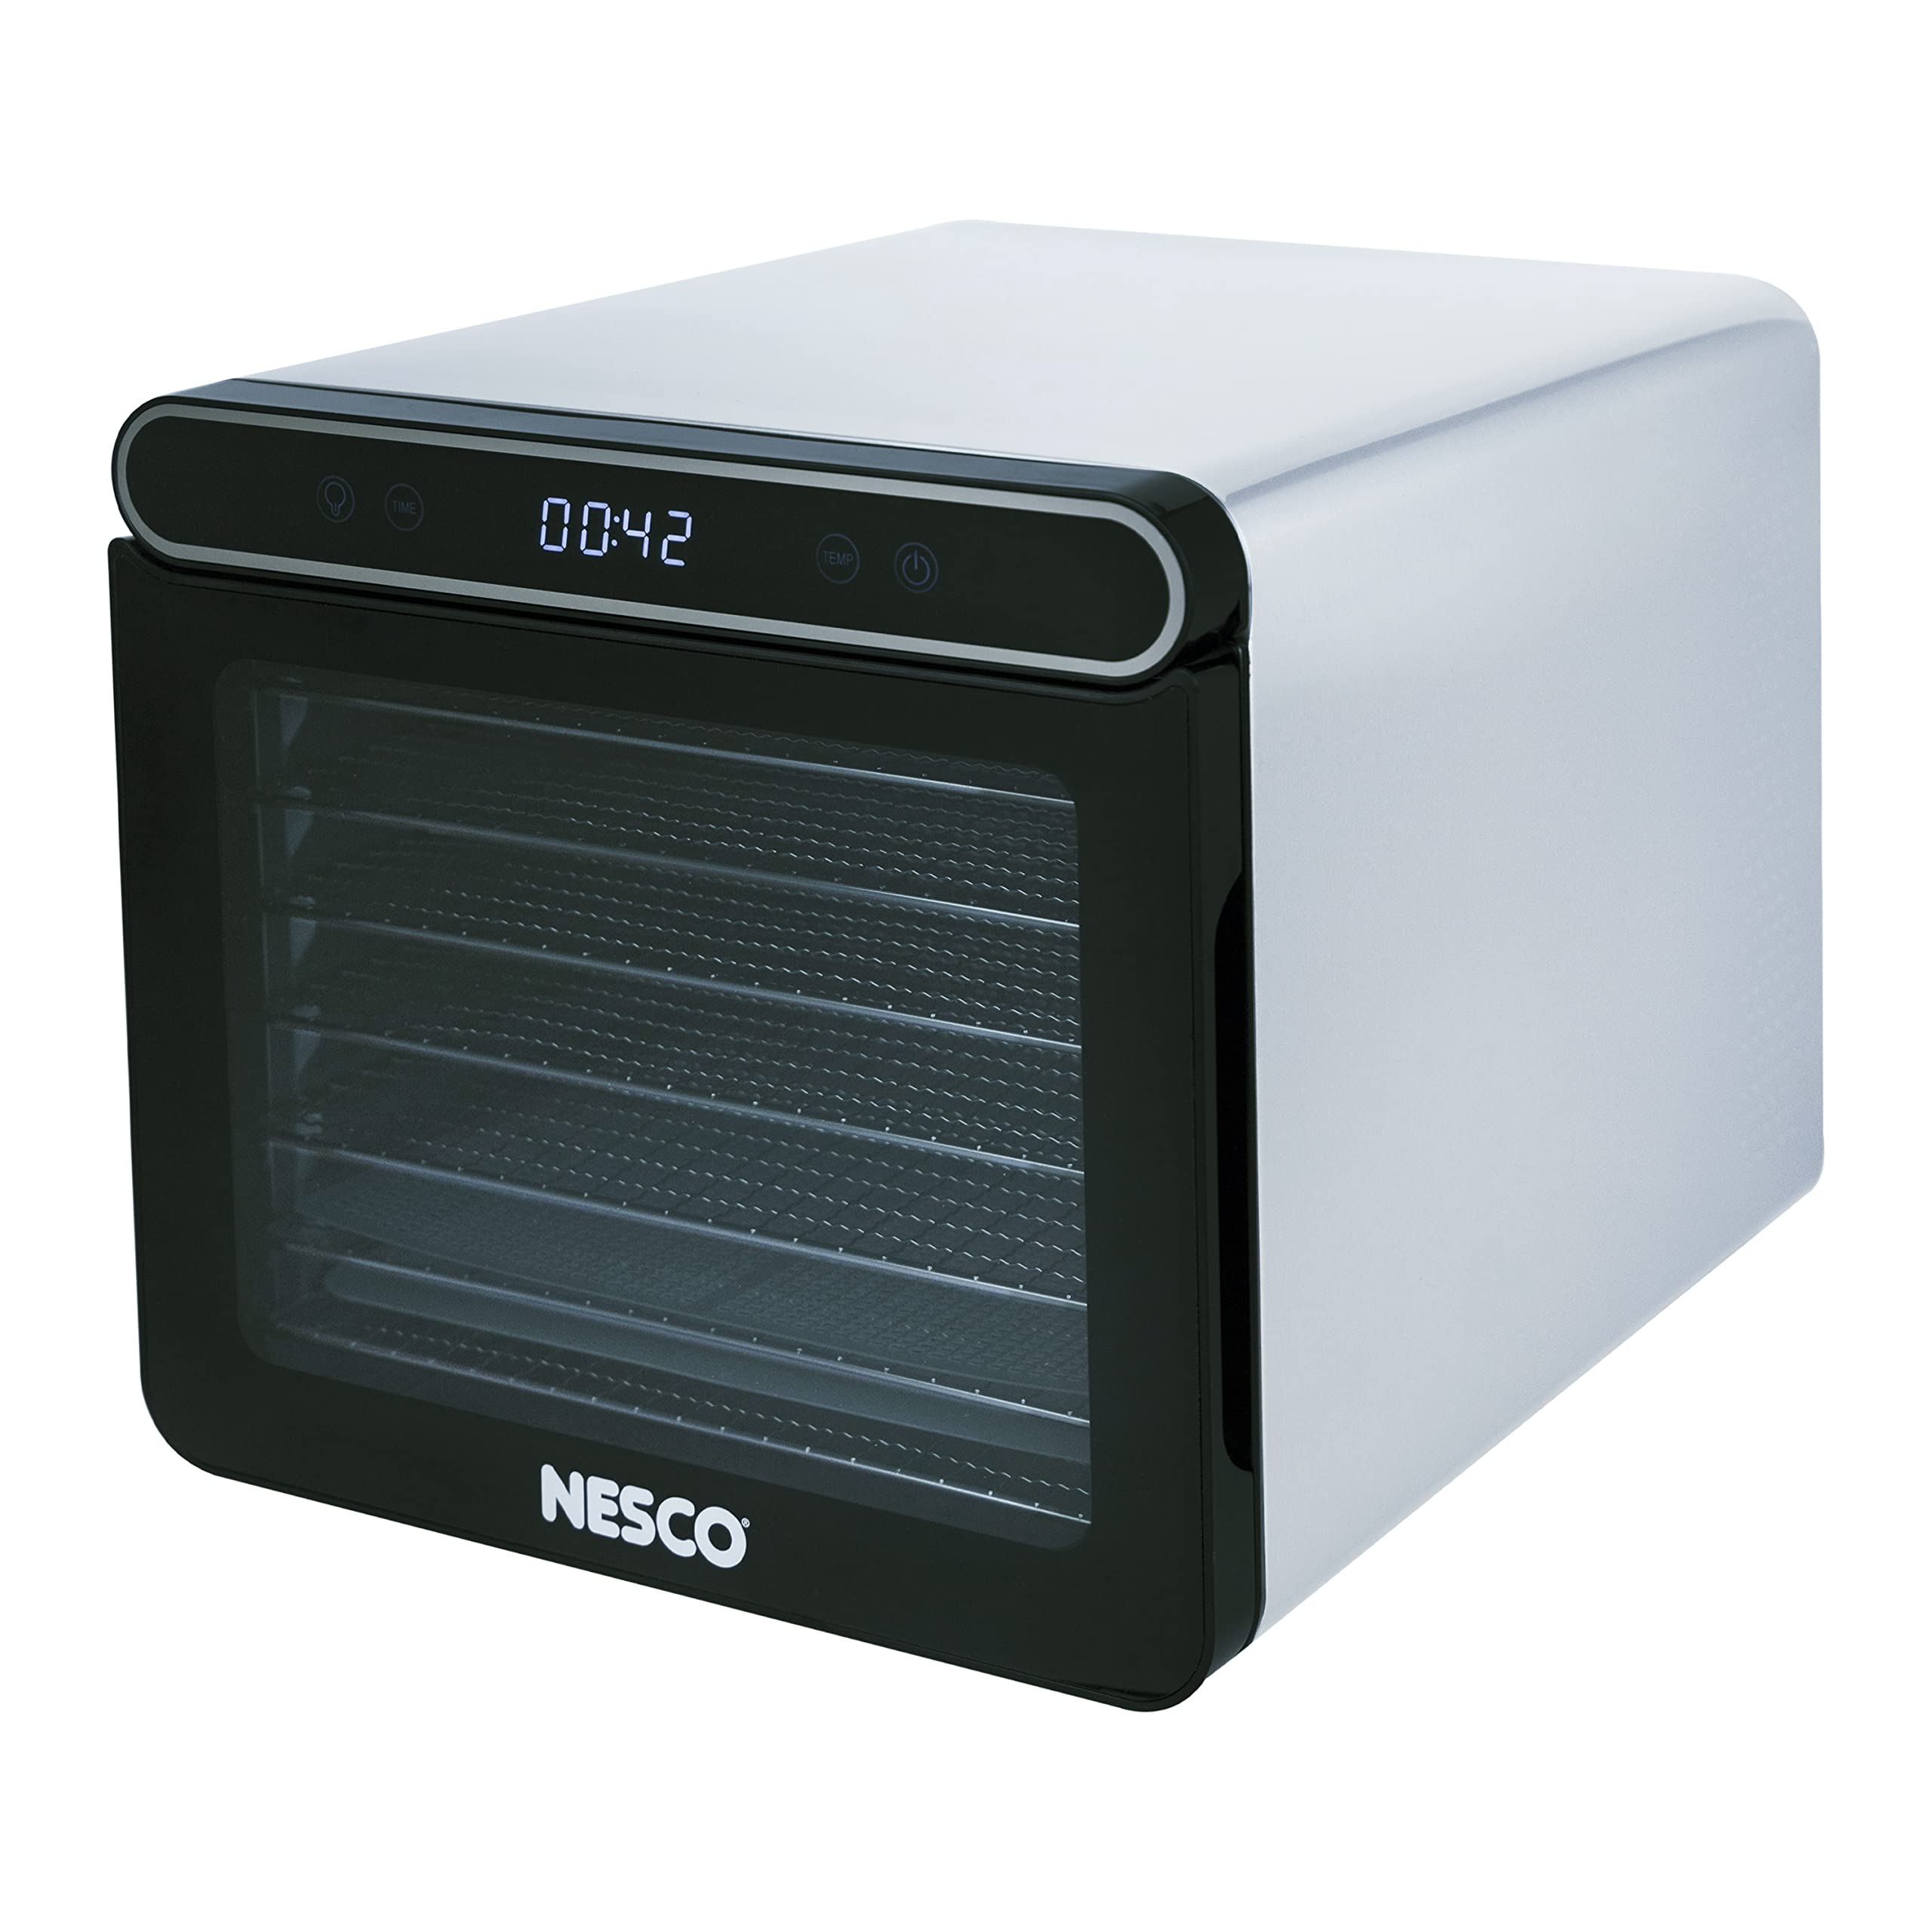 NESCO FD-7SSD Digital Food Dehydrator for Beef Jerky, Dried Fruit and Dog Treats, 7 Stainless Steel Trays, Silver